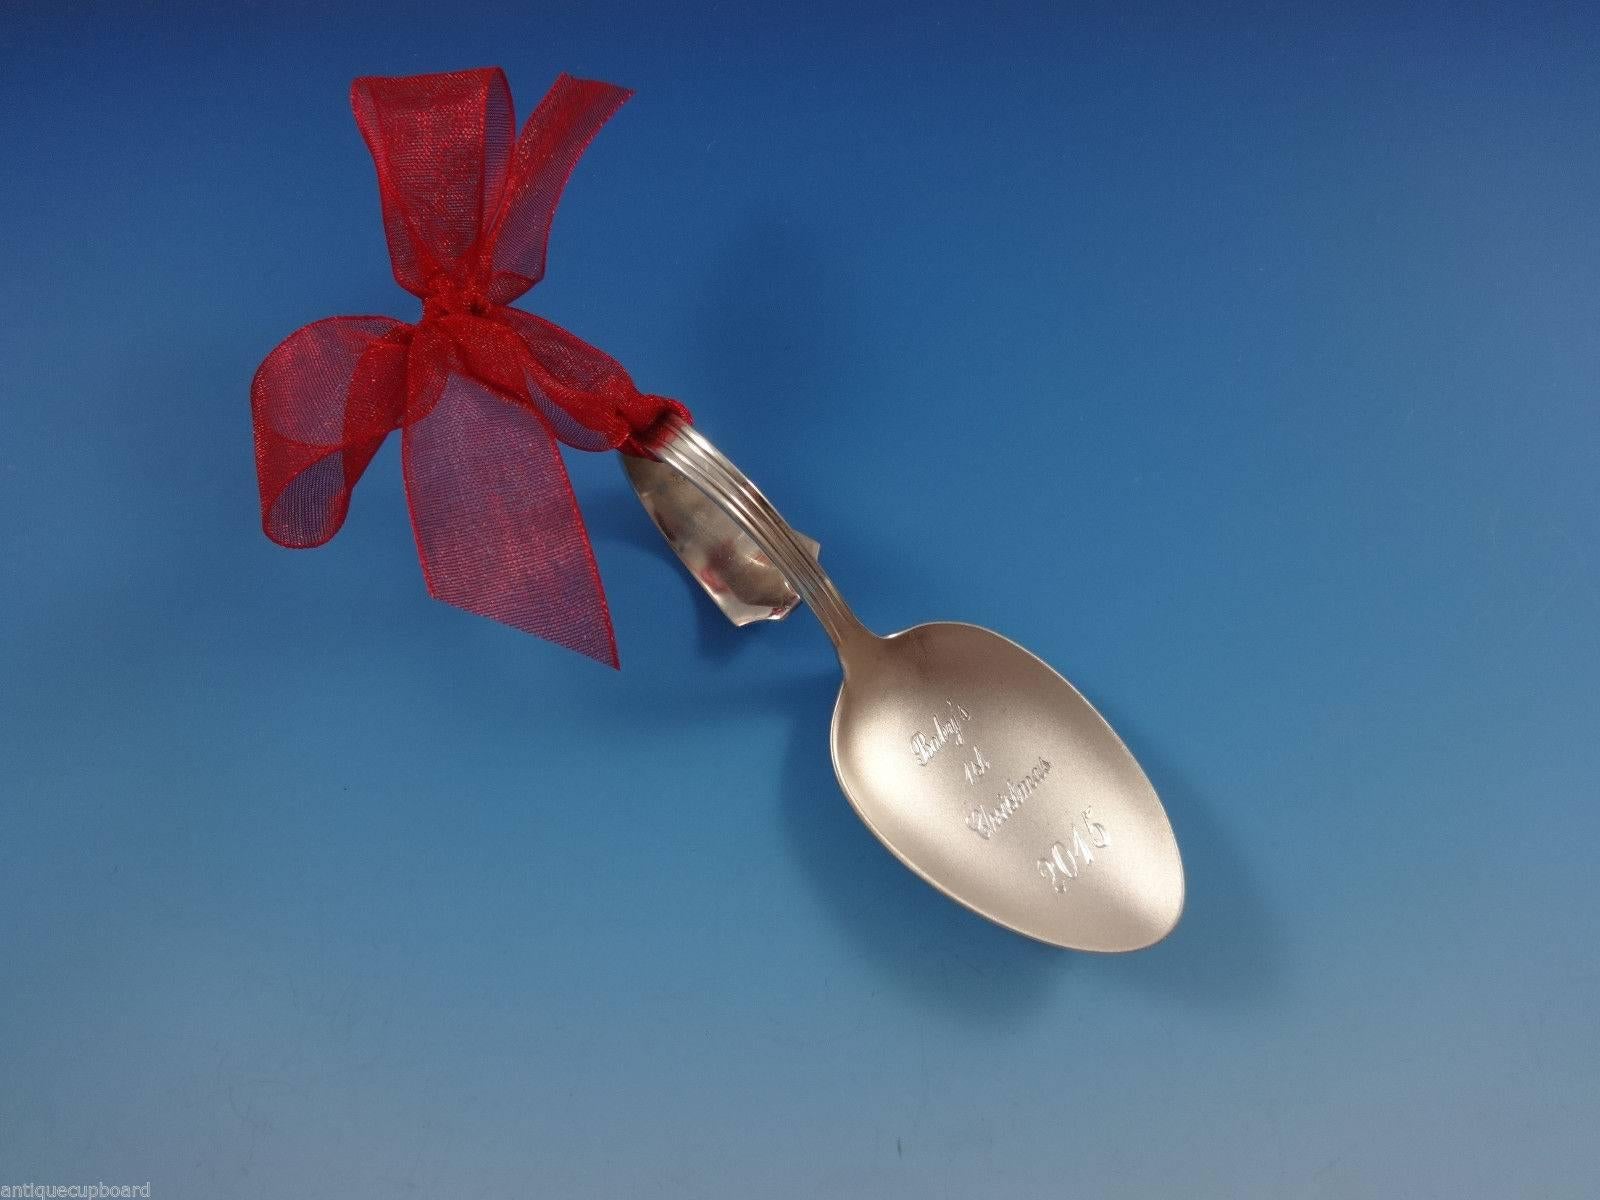 Beautiful, engraved sterling silver 2015 bent baby spoon ornament!

This beautiful 3 5/8